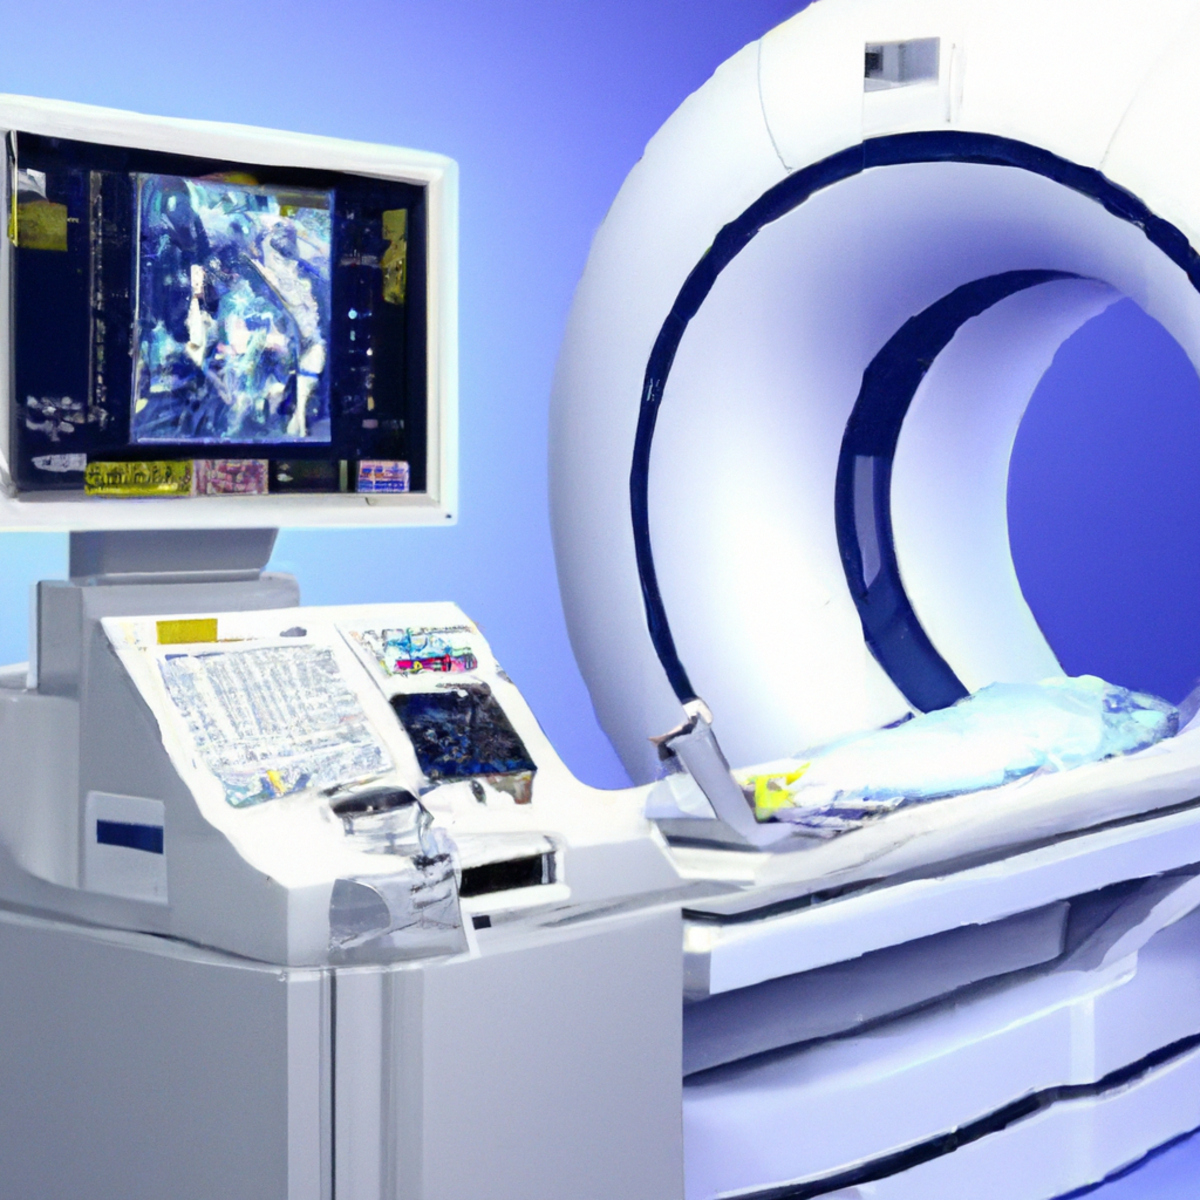 Cutting-edge medical imaging machine surrounded by diagnostic tools, displaying detailed pancreas images. Emphasizes advancements in autoimmune pancreatitis diagnosis.